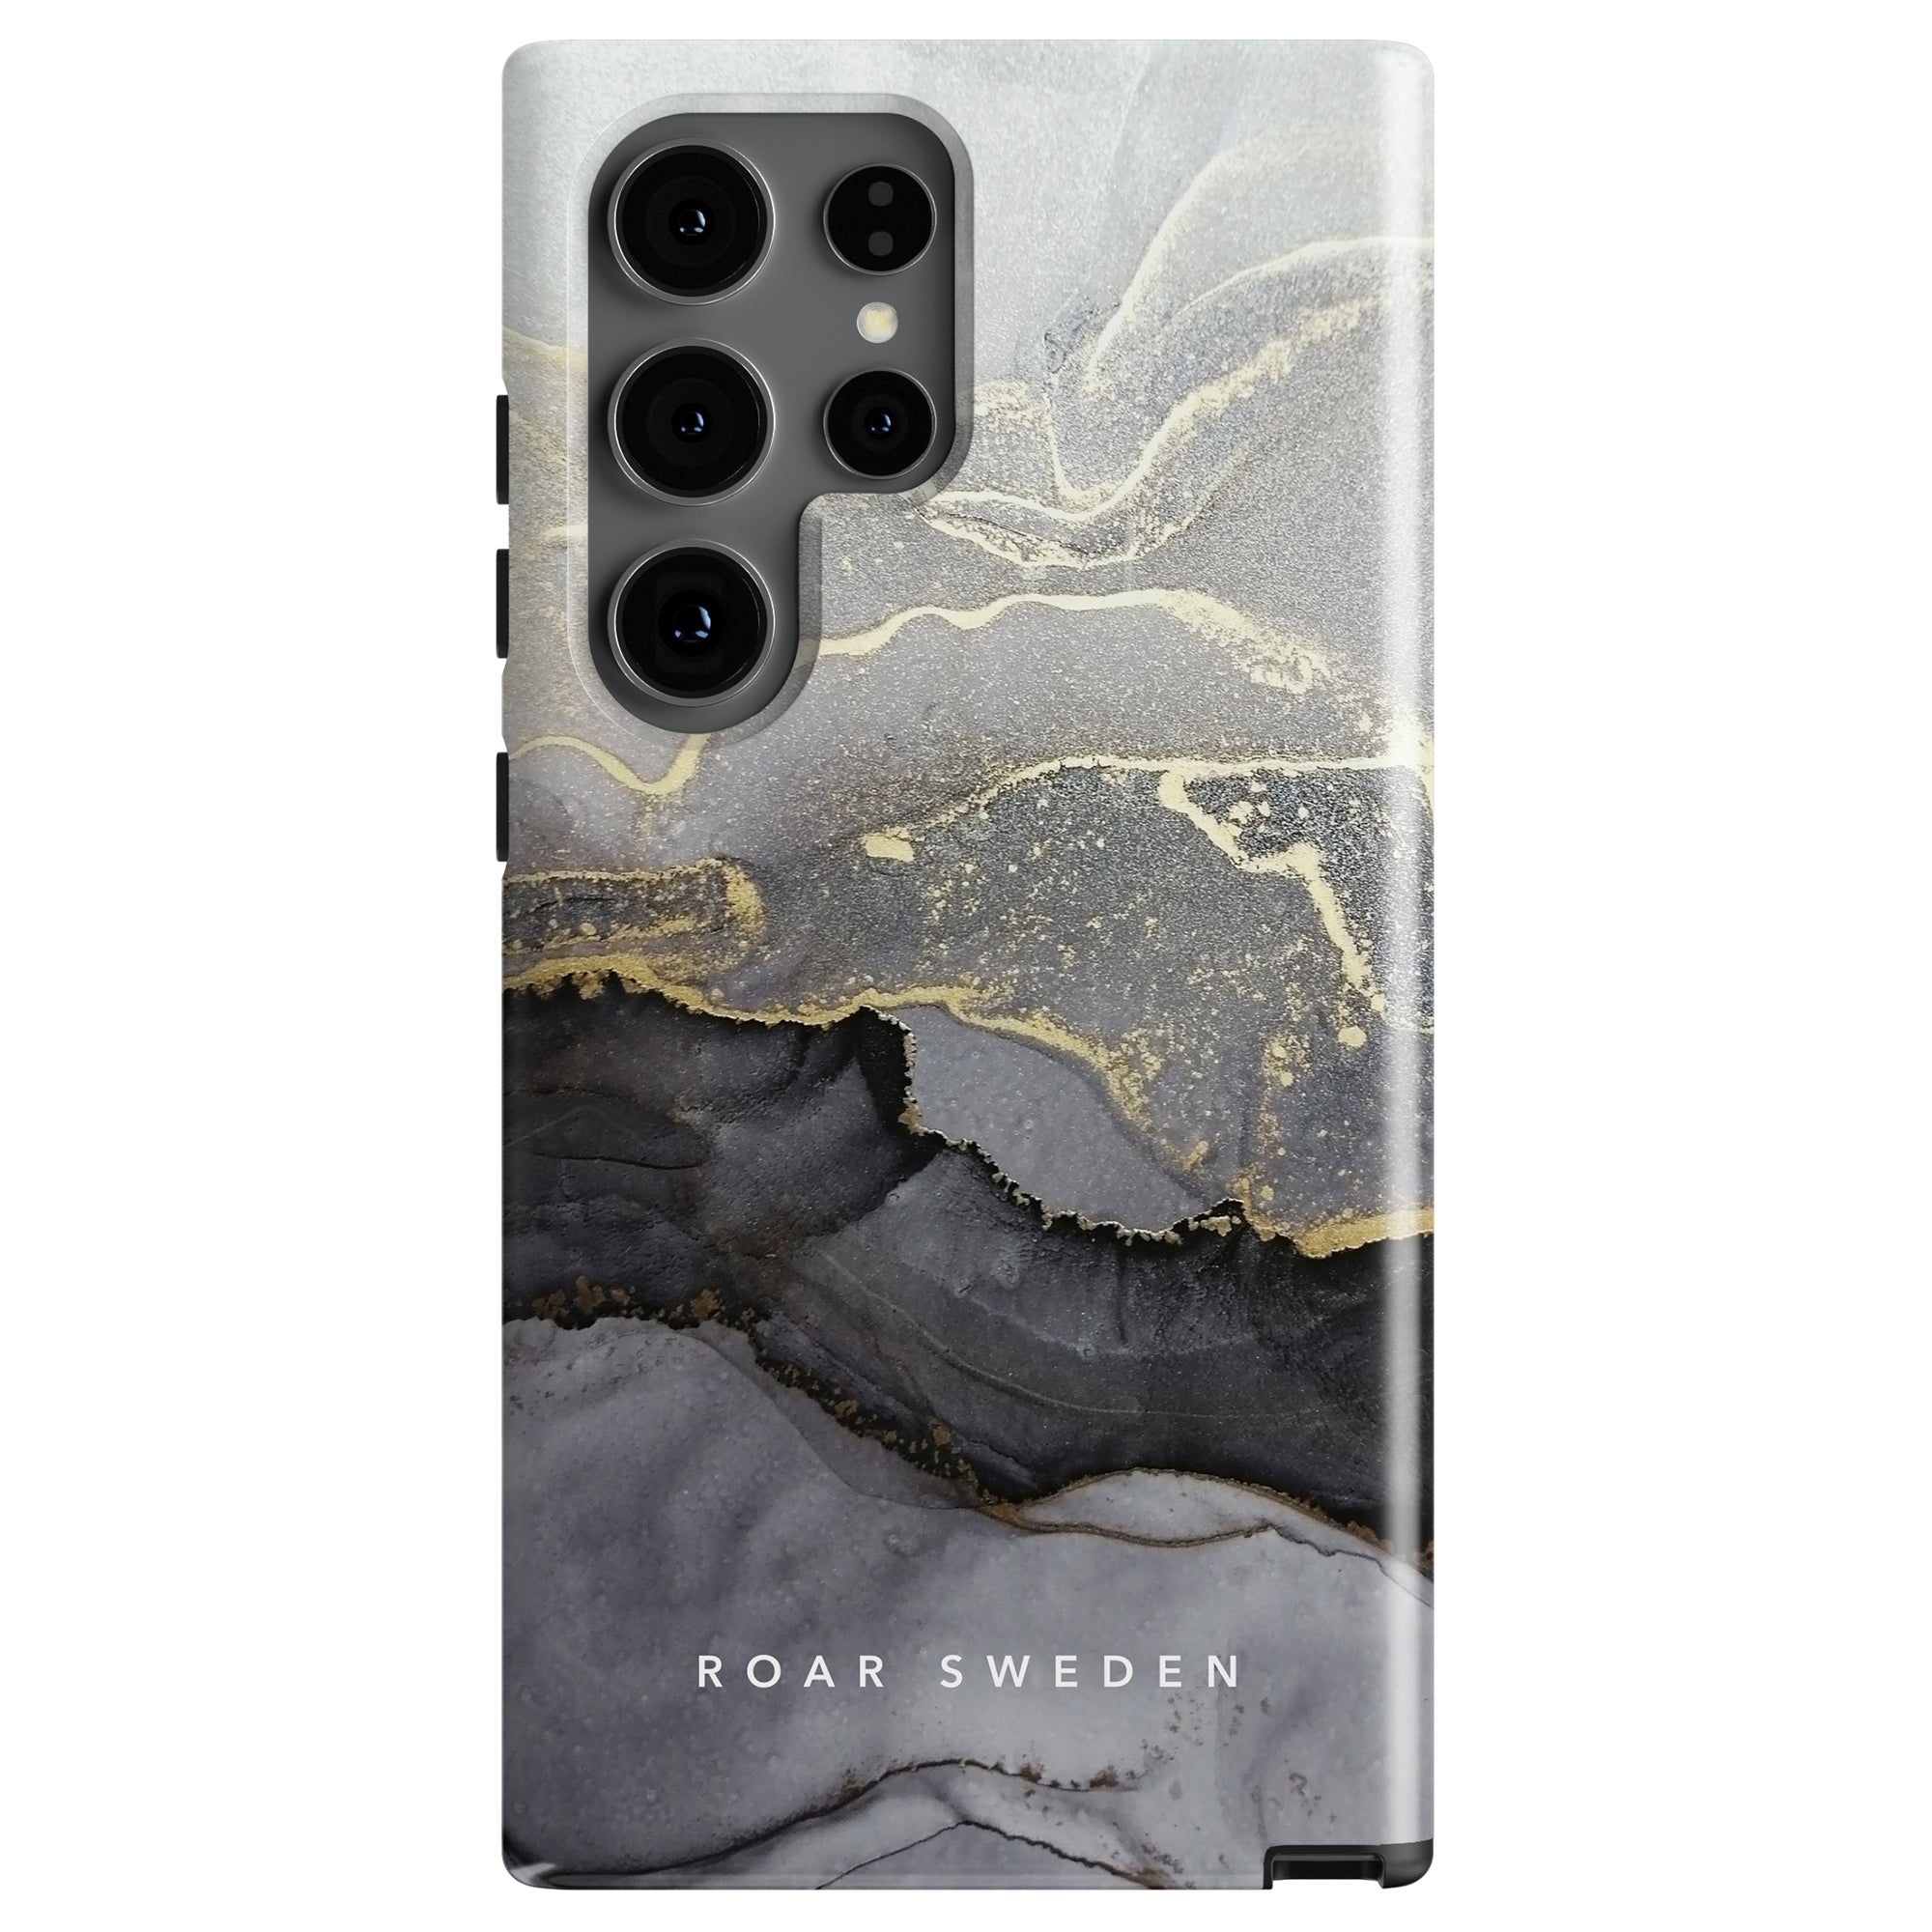 Smartphone encased in a Sparkle - Tough Case with a marmor mobilskal design in shades of gray and gold. "ROAR SWEDEN" is elegantly inscribed on the case. The phone also boasts multiple rear cameras, perfect for capturing every moment.